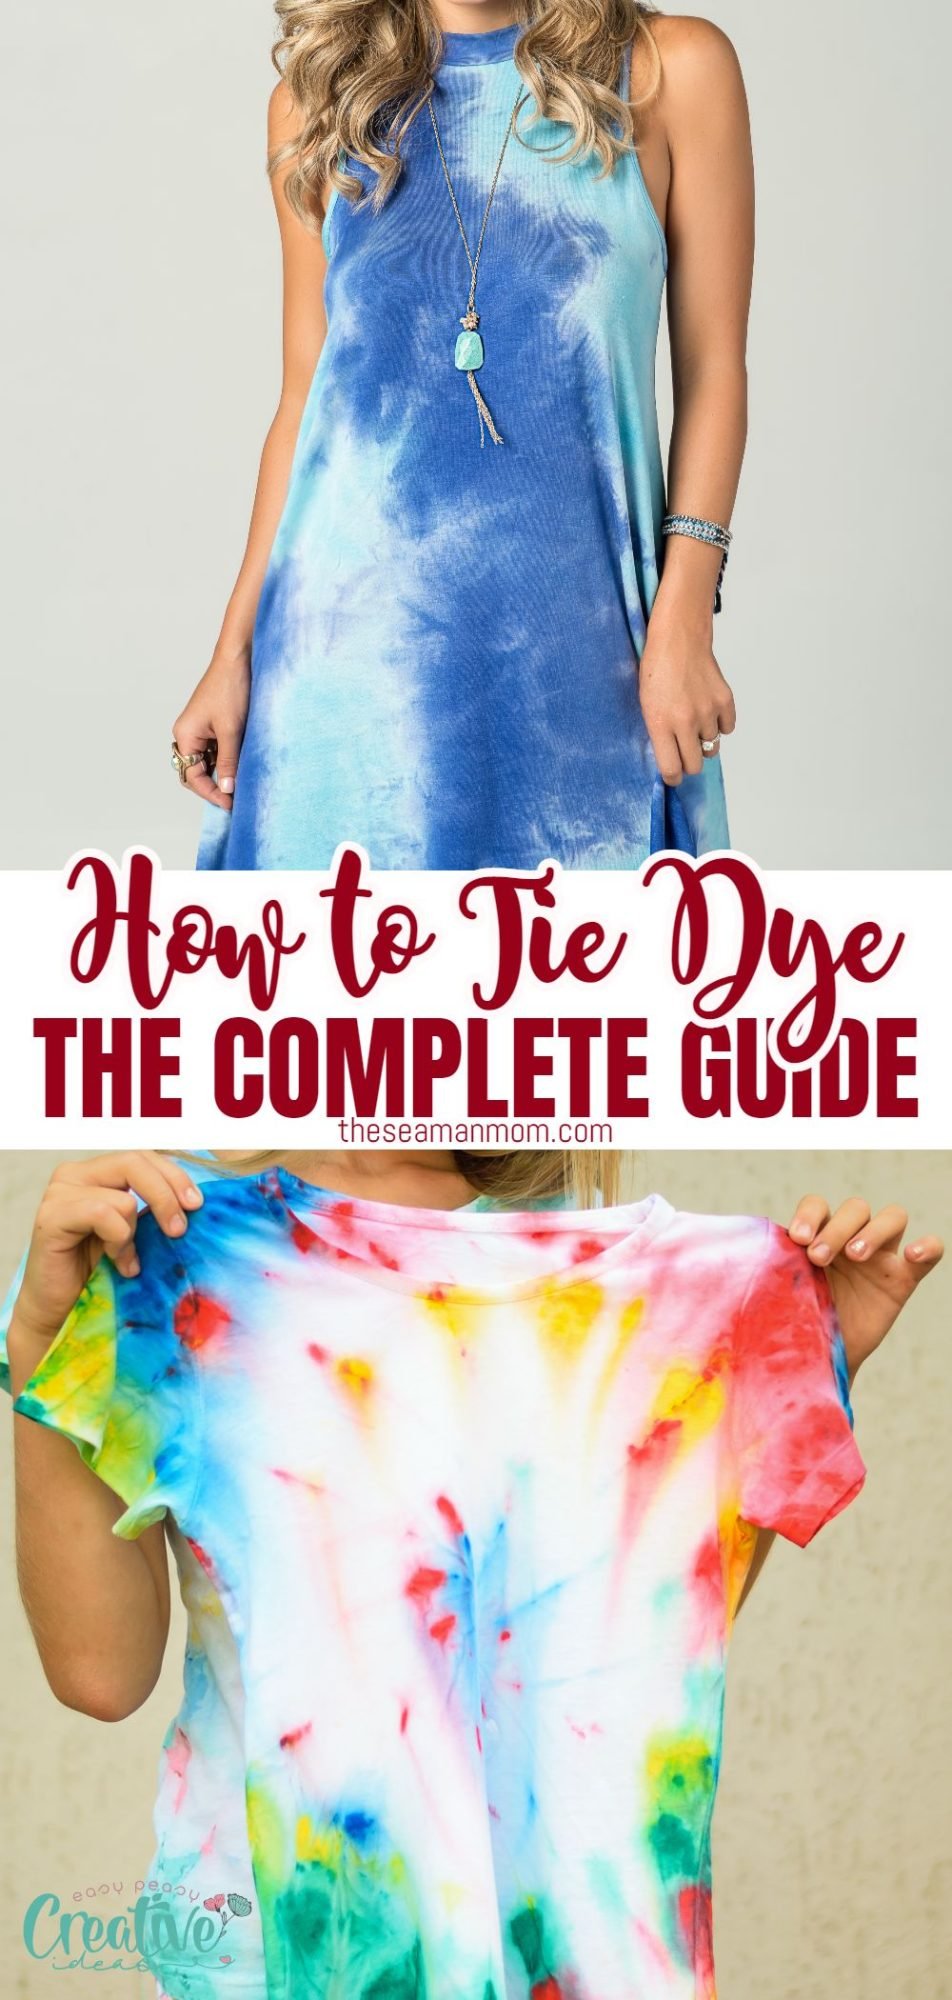 Photo collage of tie dyed clothing items illustrating various techniques for how to tie dye at home